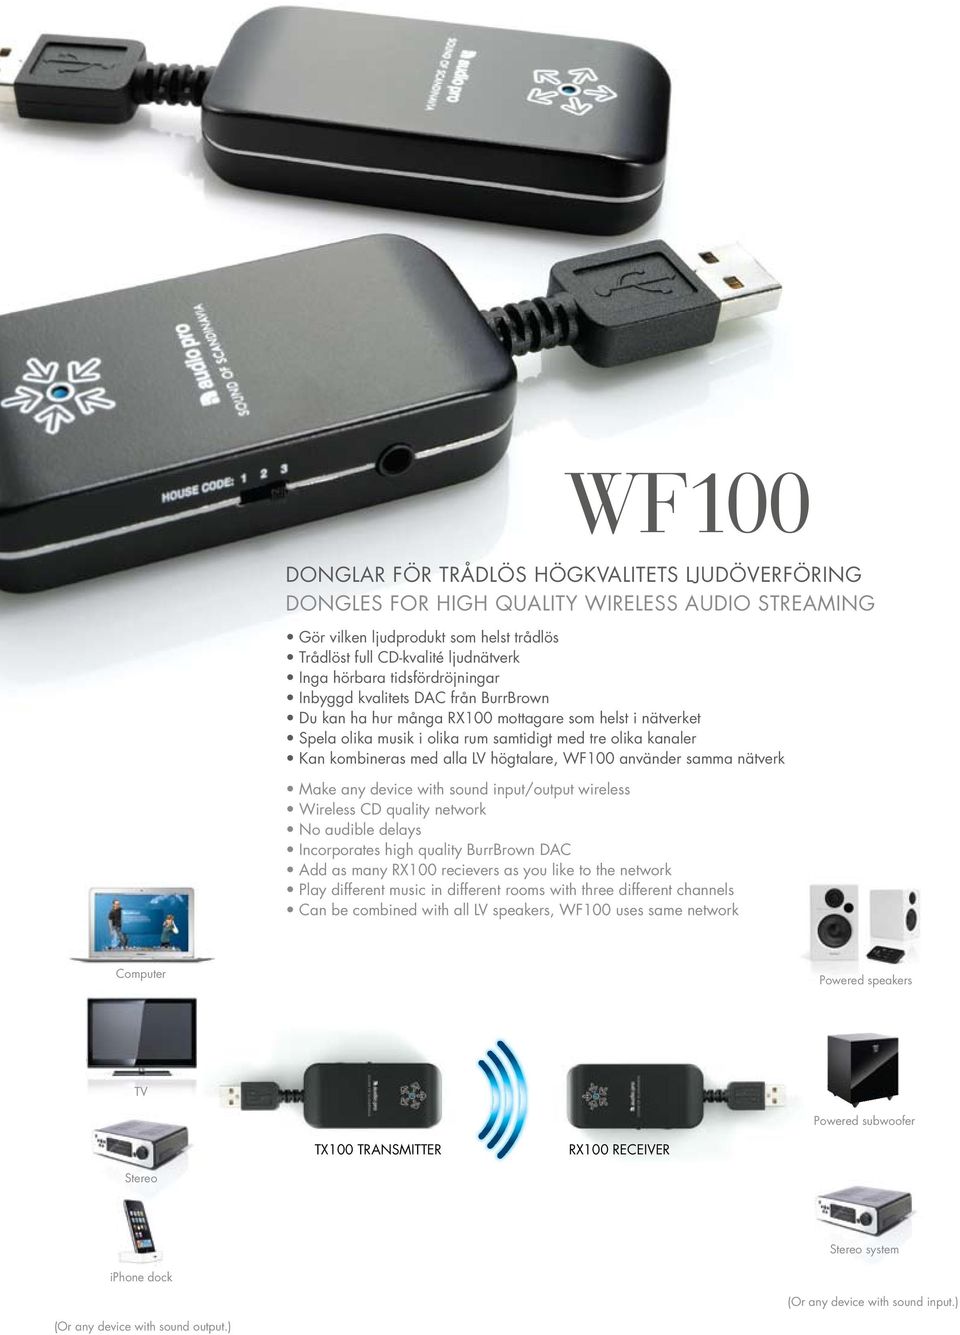 LV högtalare, WF100 använder samma nätverk Make any device with sound input/output wireless Wireless CD quality network No audible delays Incorporates high quality BurrBrown DAC Add as many RX100